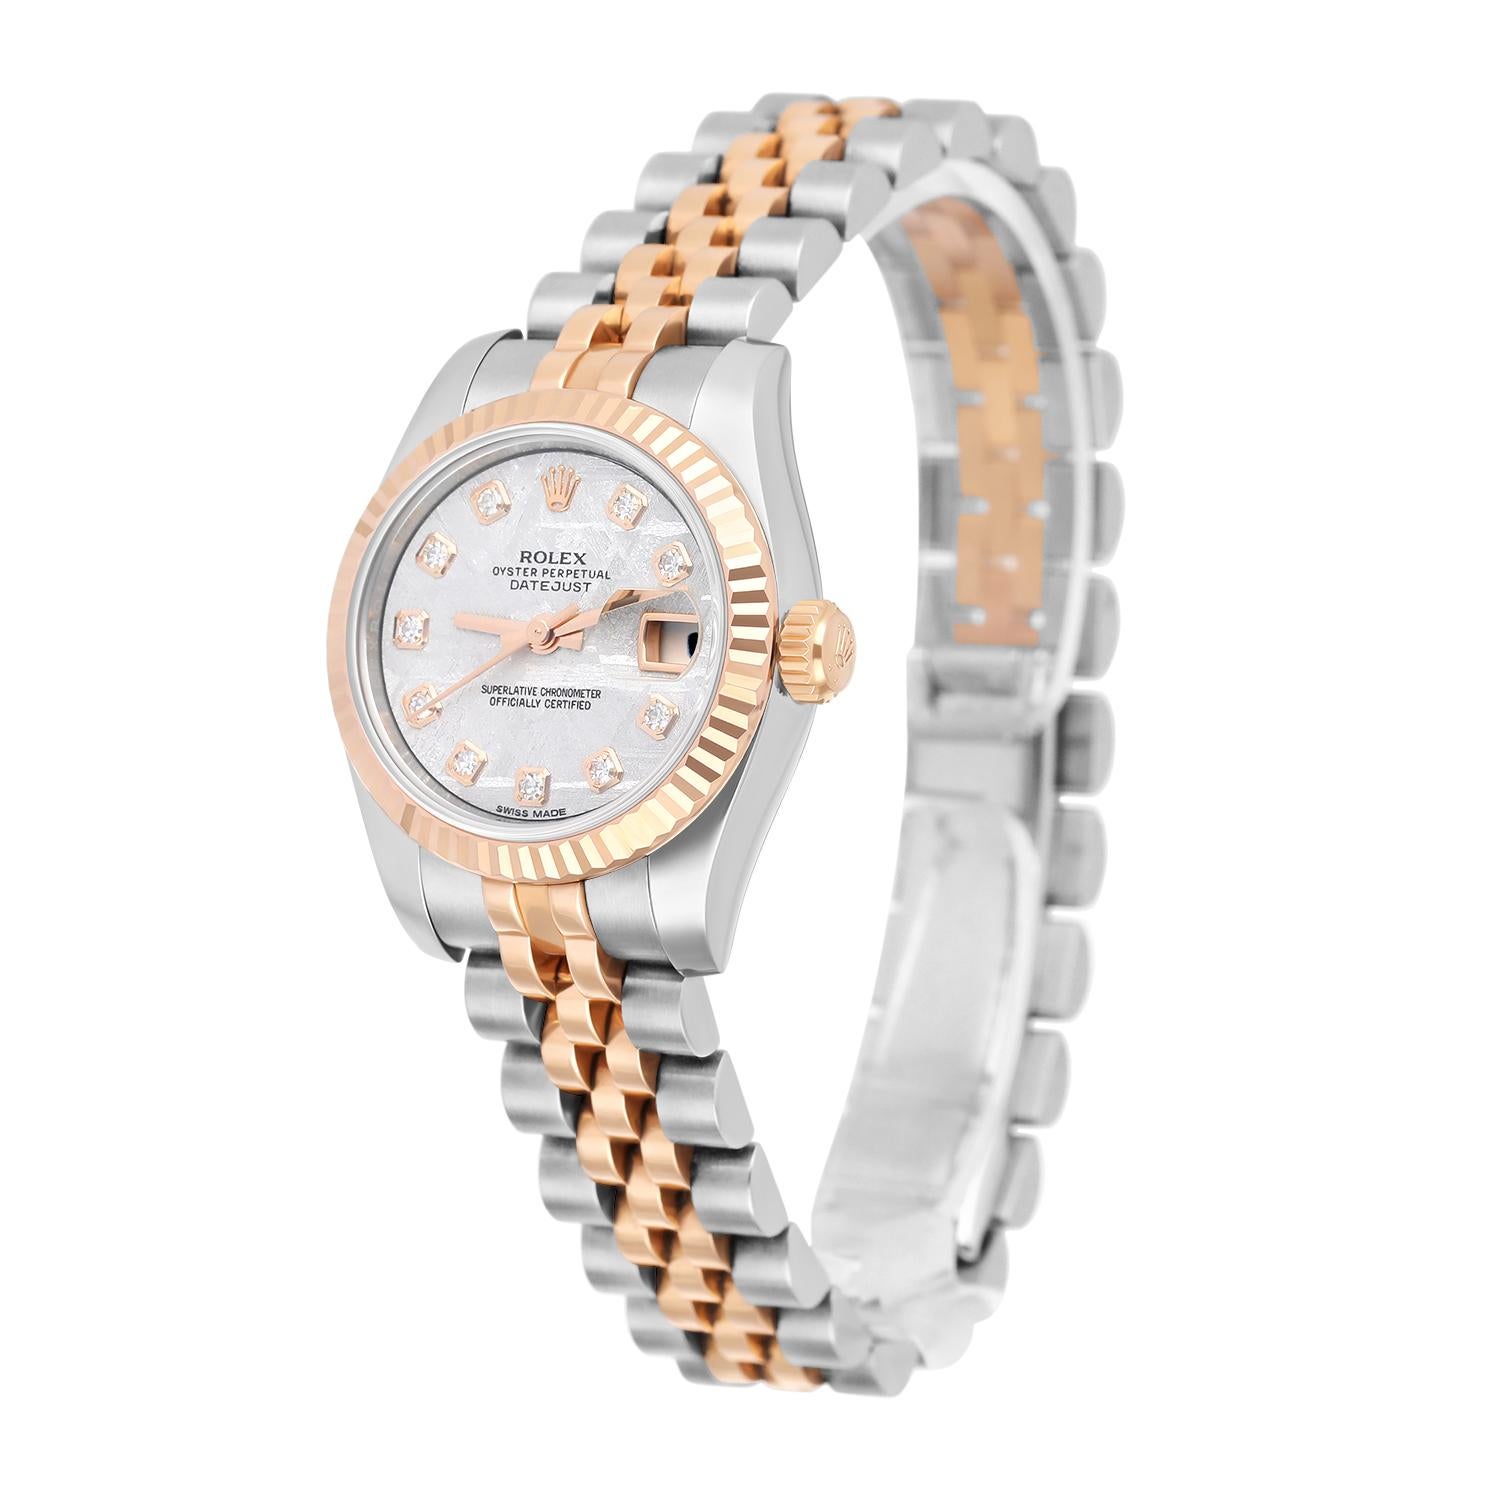 Women's Rolex Lady-Datejust 26mm Stainless Steel & Rose Gold 179171 Meteorite Diamond For Sale